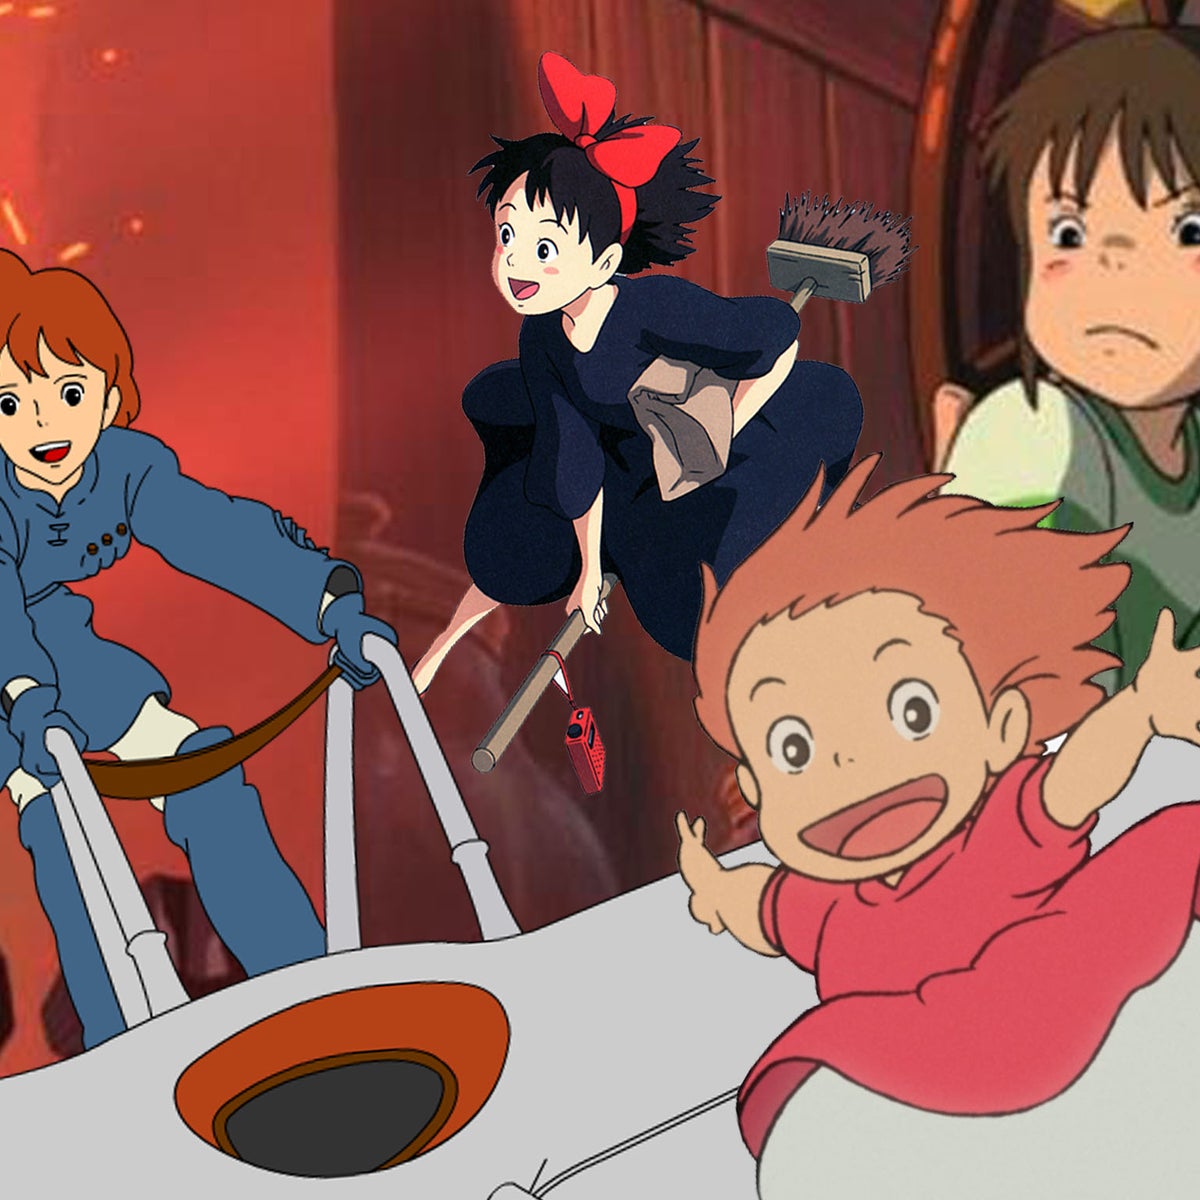 It's good to be alive': The Studio Ghibli films are coming to